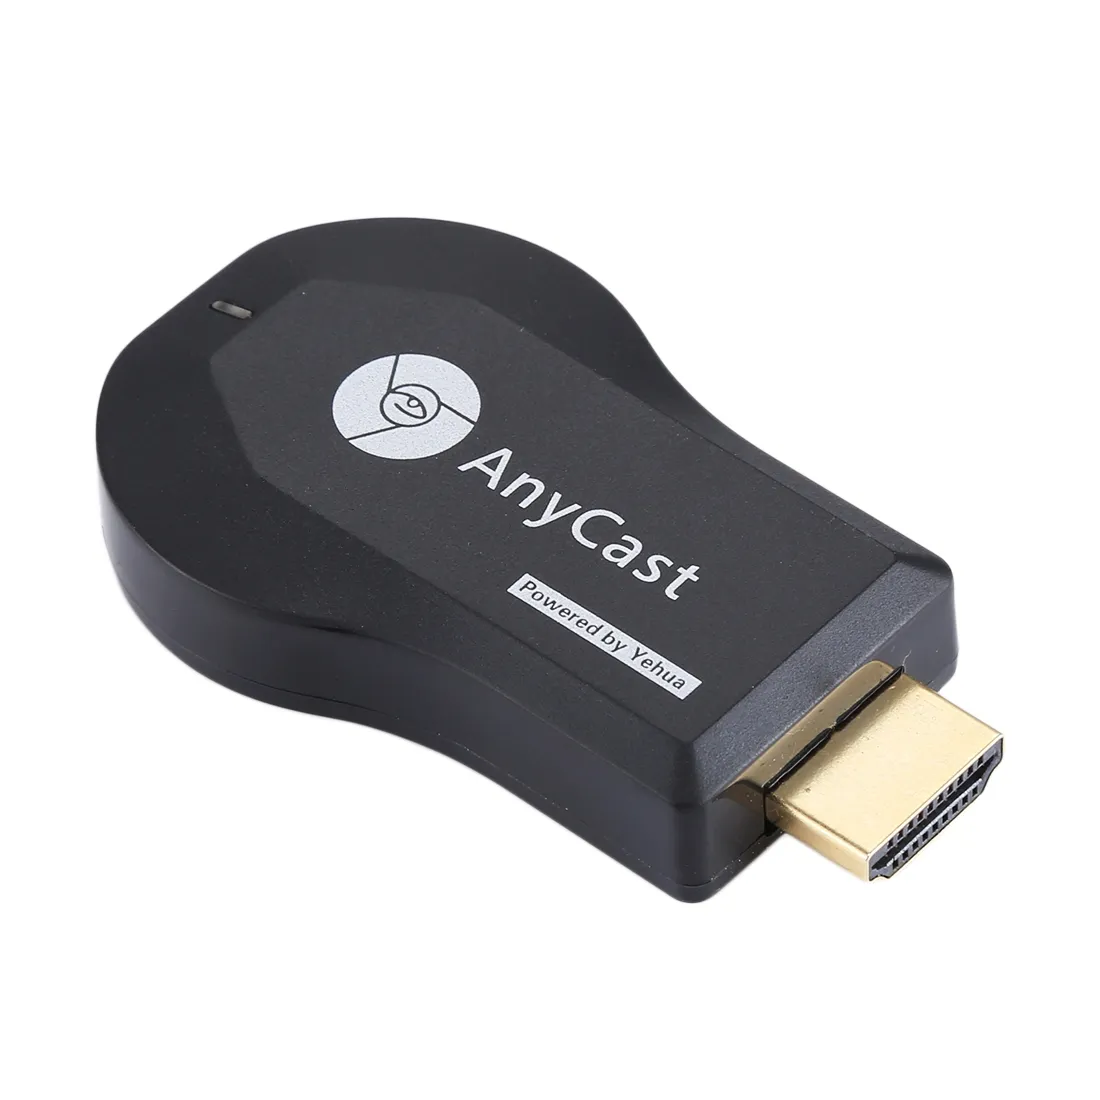 Dropshipping AnyCast M4 Plus Wireless WiFi Display Dongle Receiver Airplay Miracast DLNA 1080P TV Stick für Smartphones